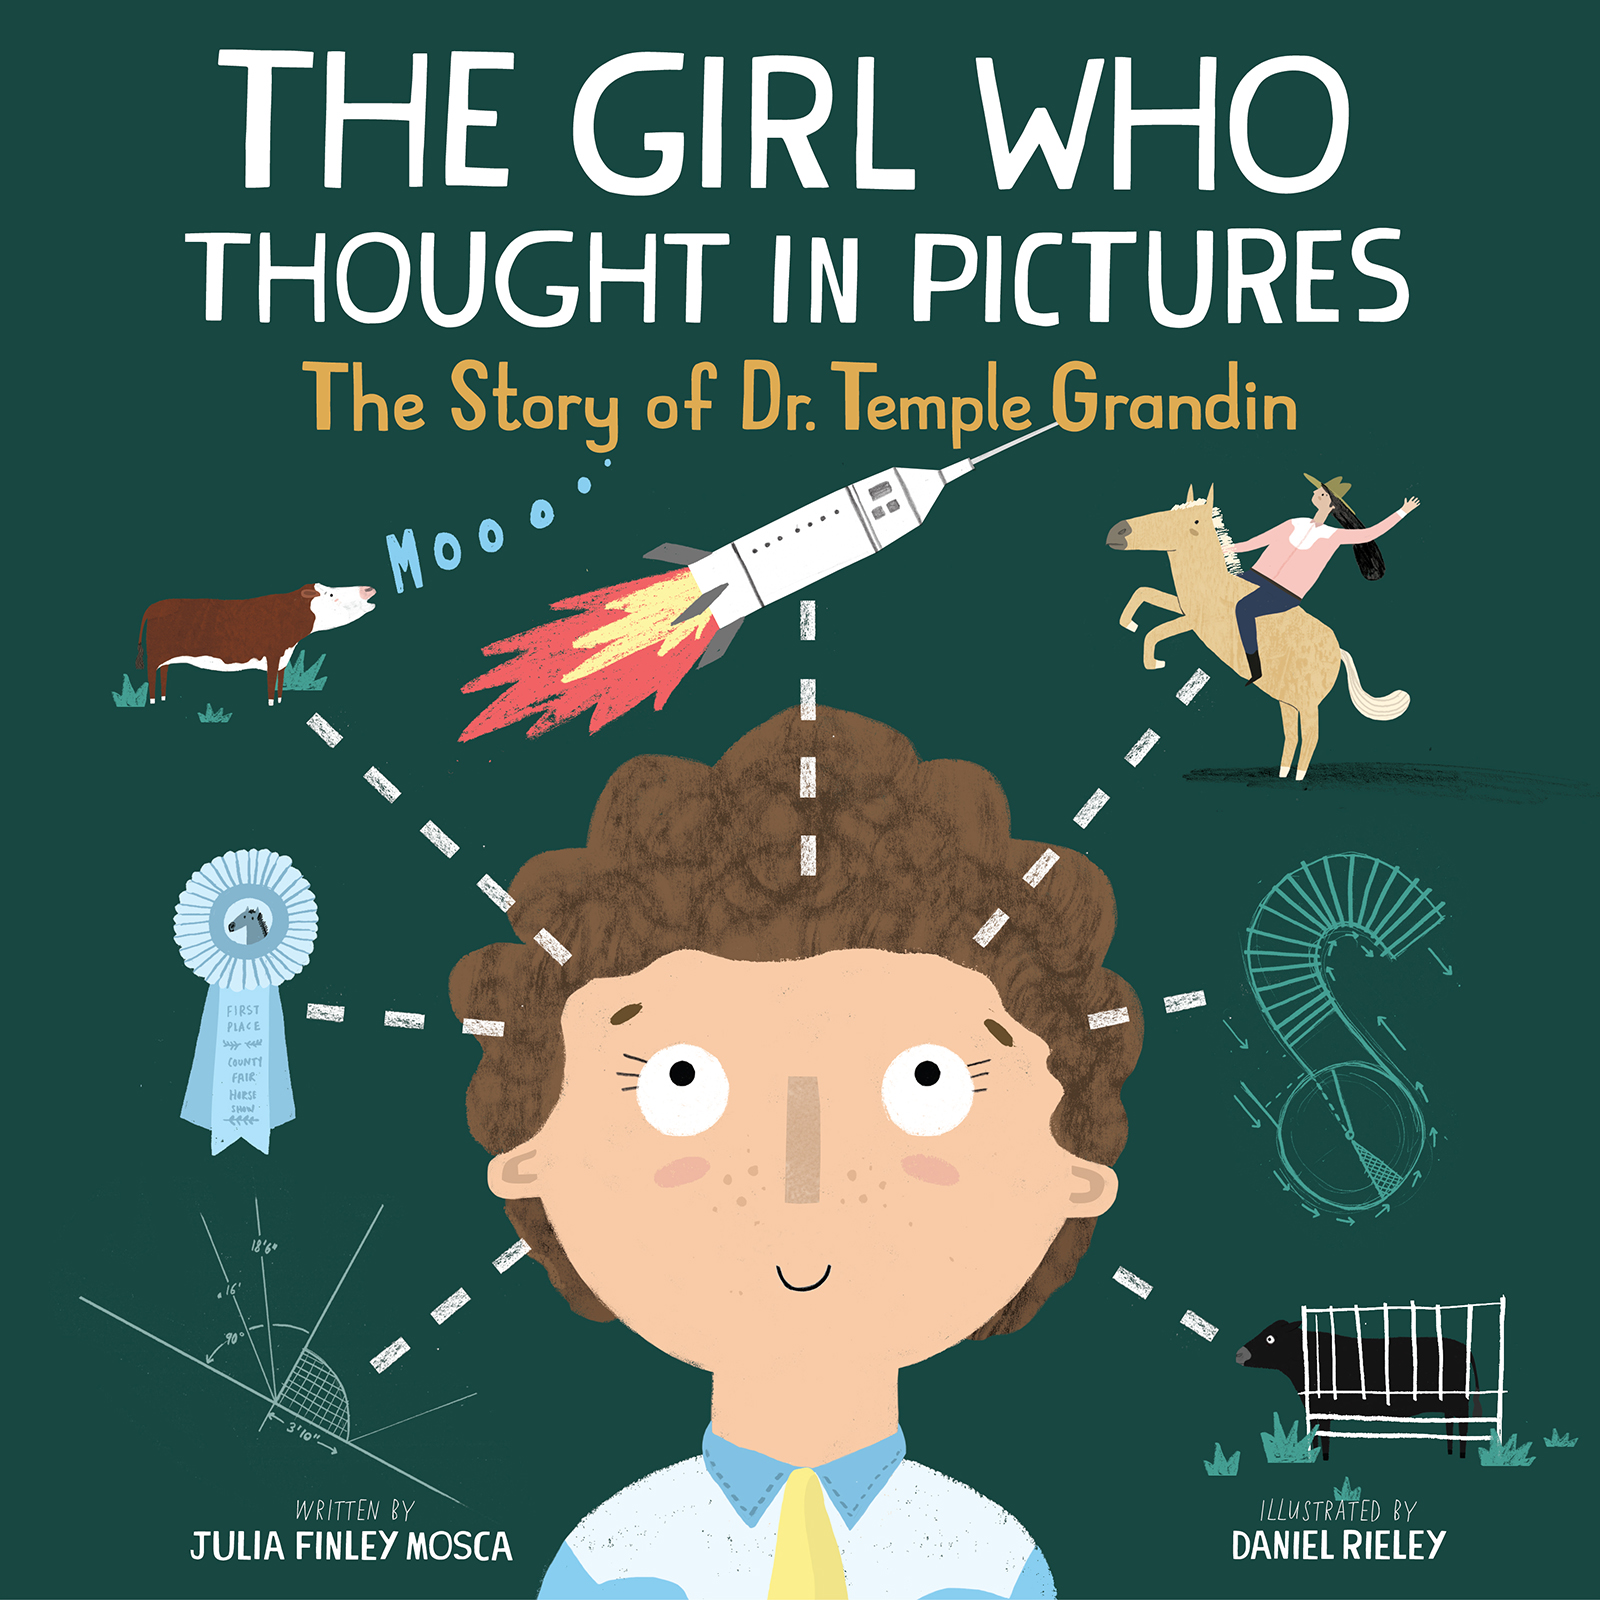 The Girl Who Thought in Pictures